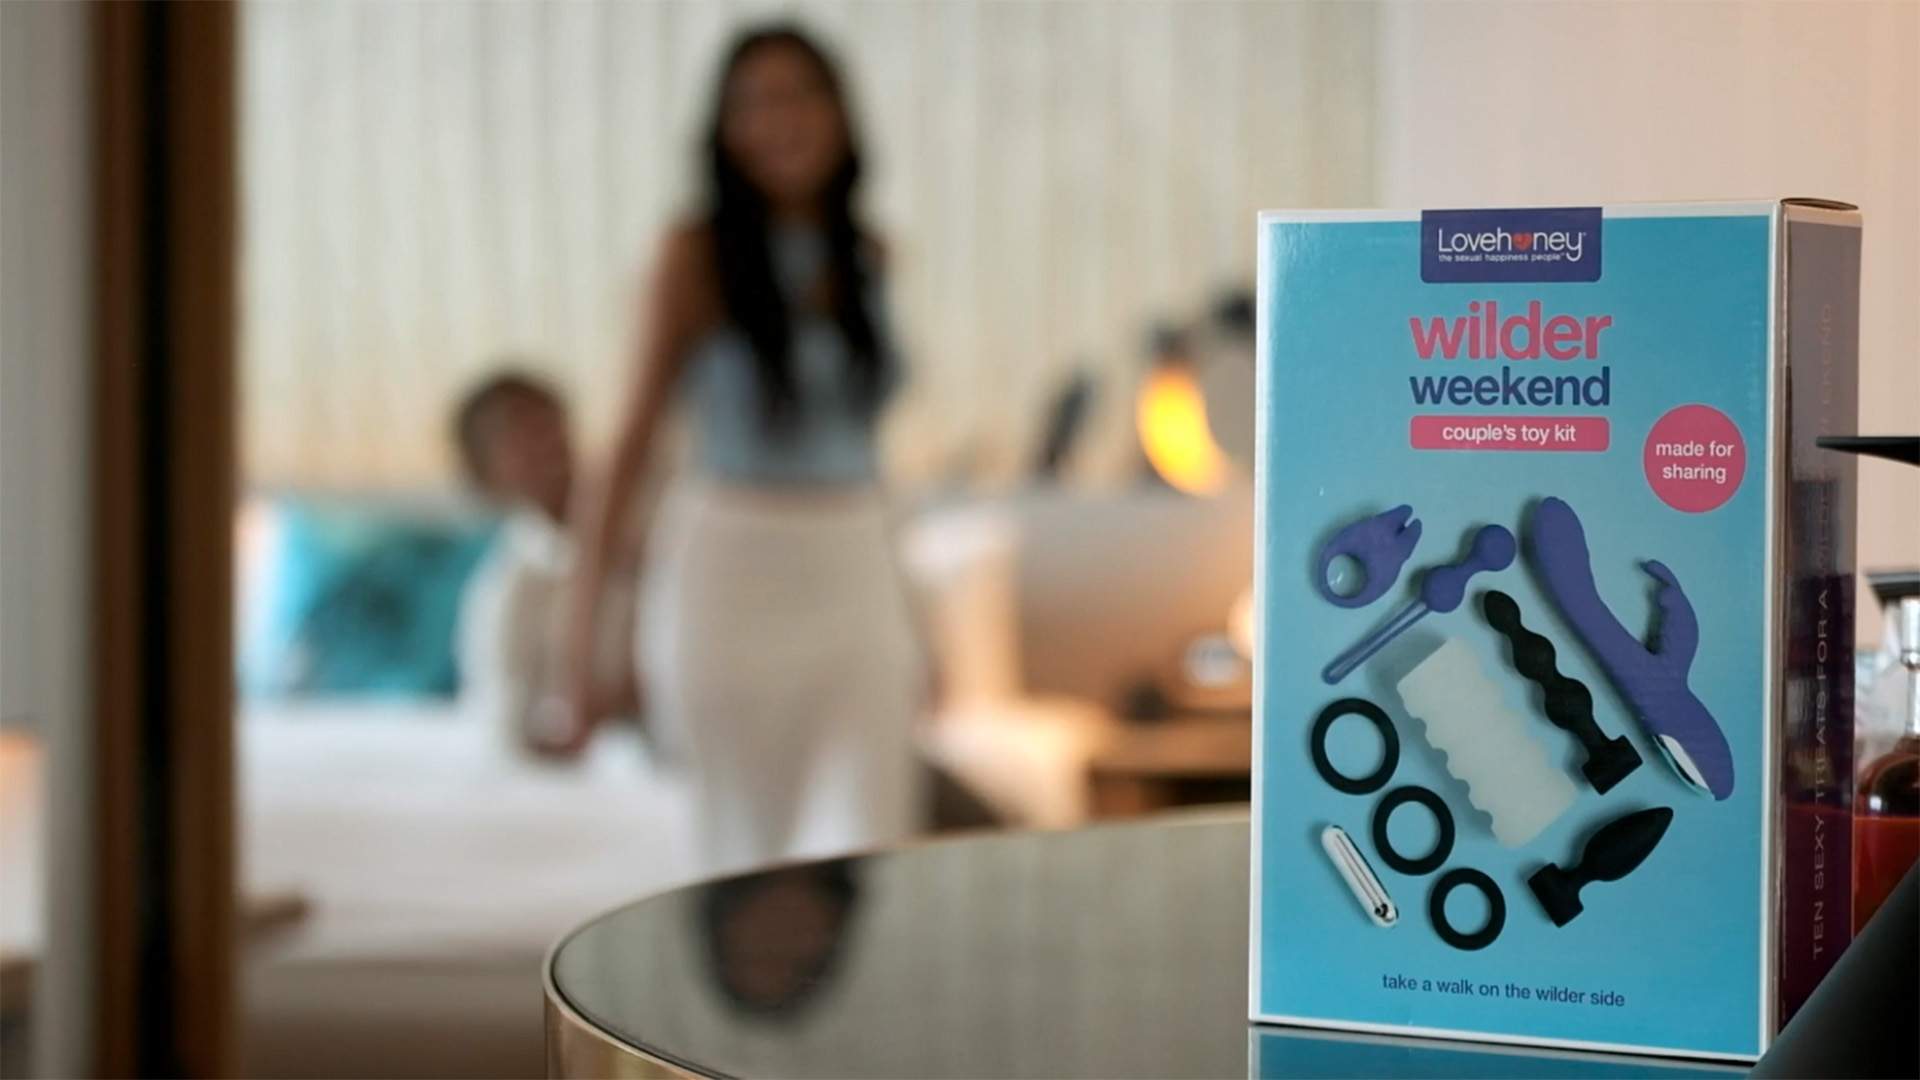 You Can Now Book Into a Sexual Wellness Hotel Suite in Brisbane That Comes with a Sex Toy Mini